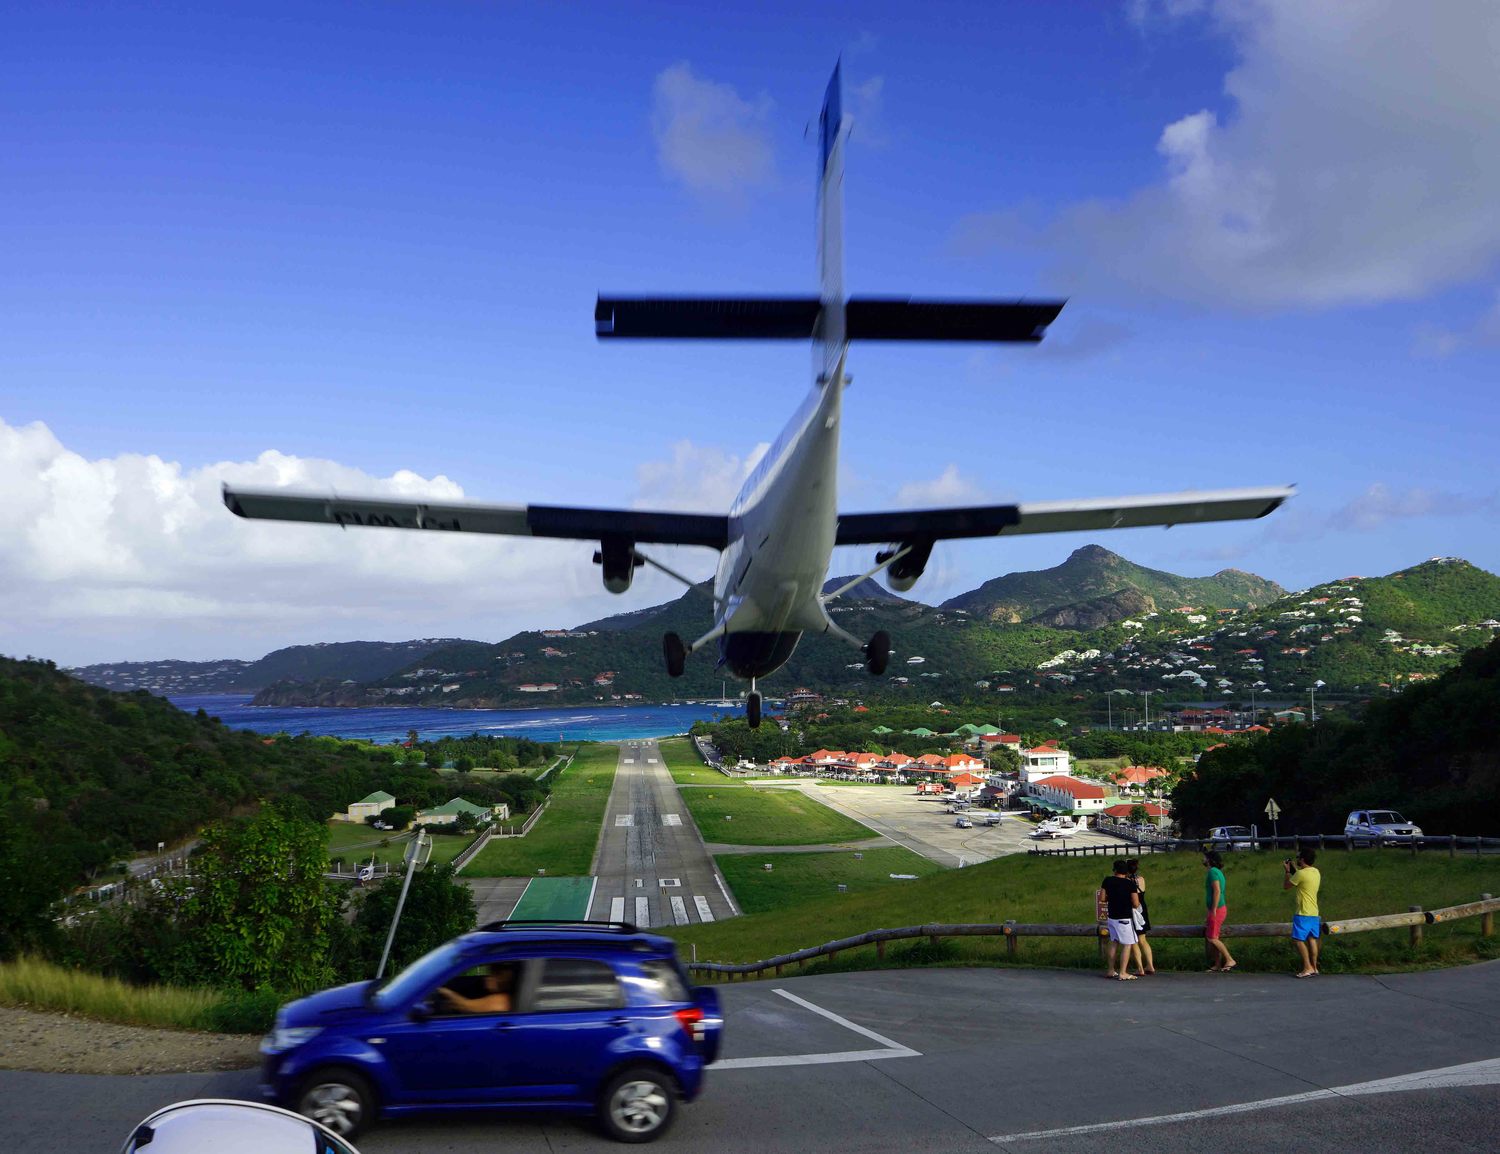 A Short Trip to St. Barts!